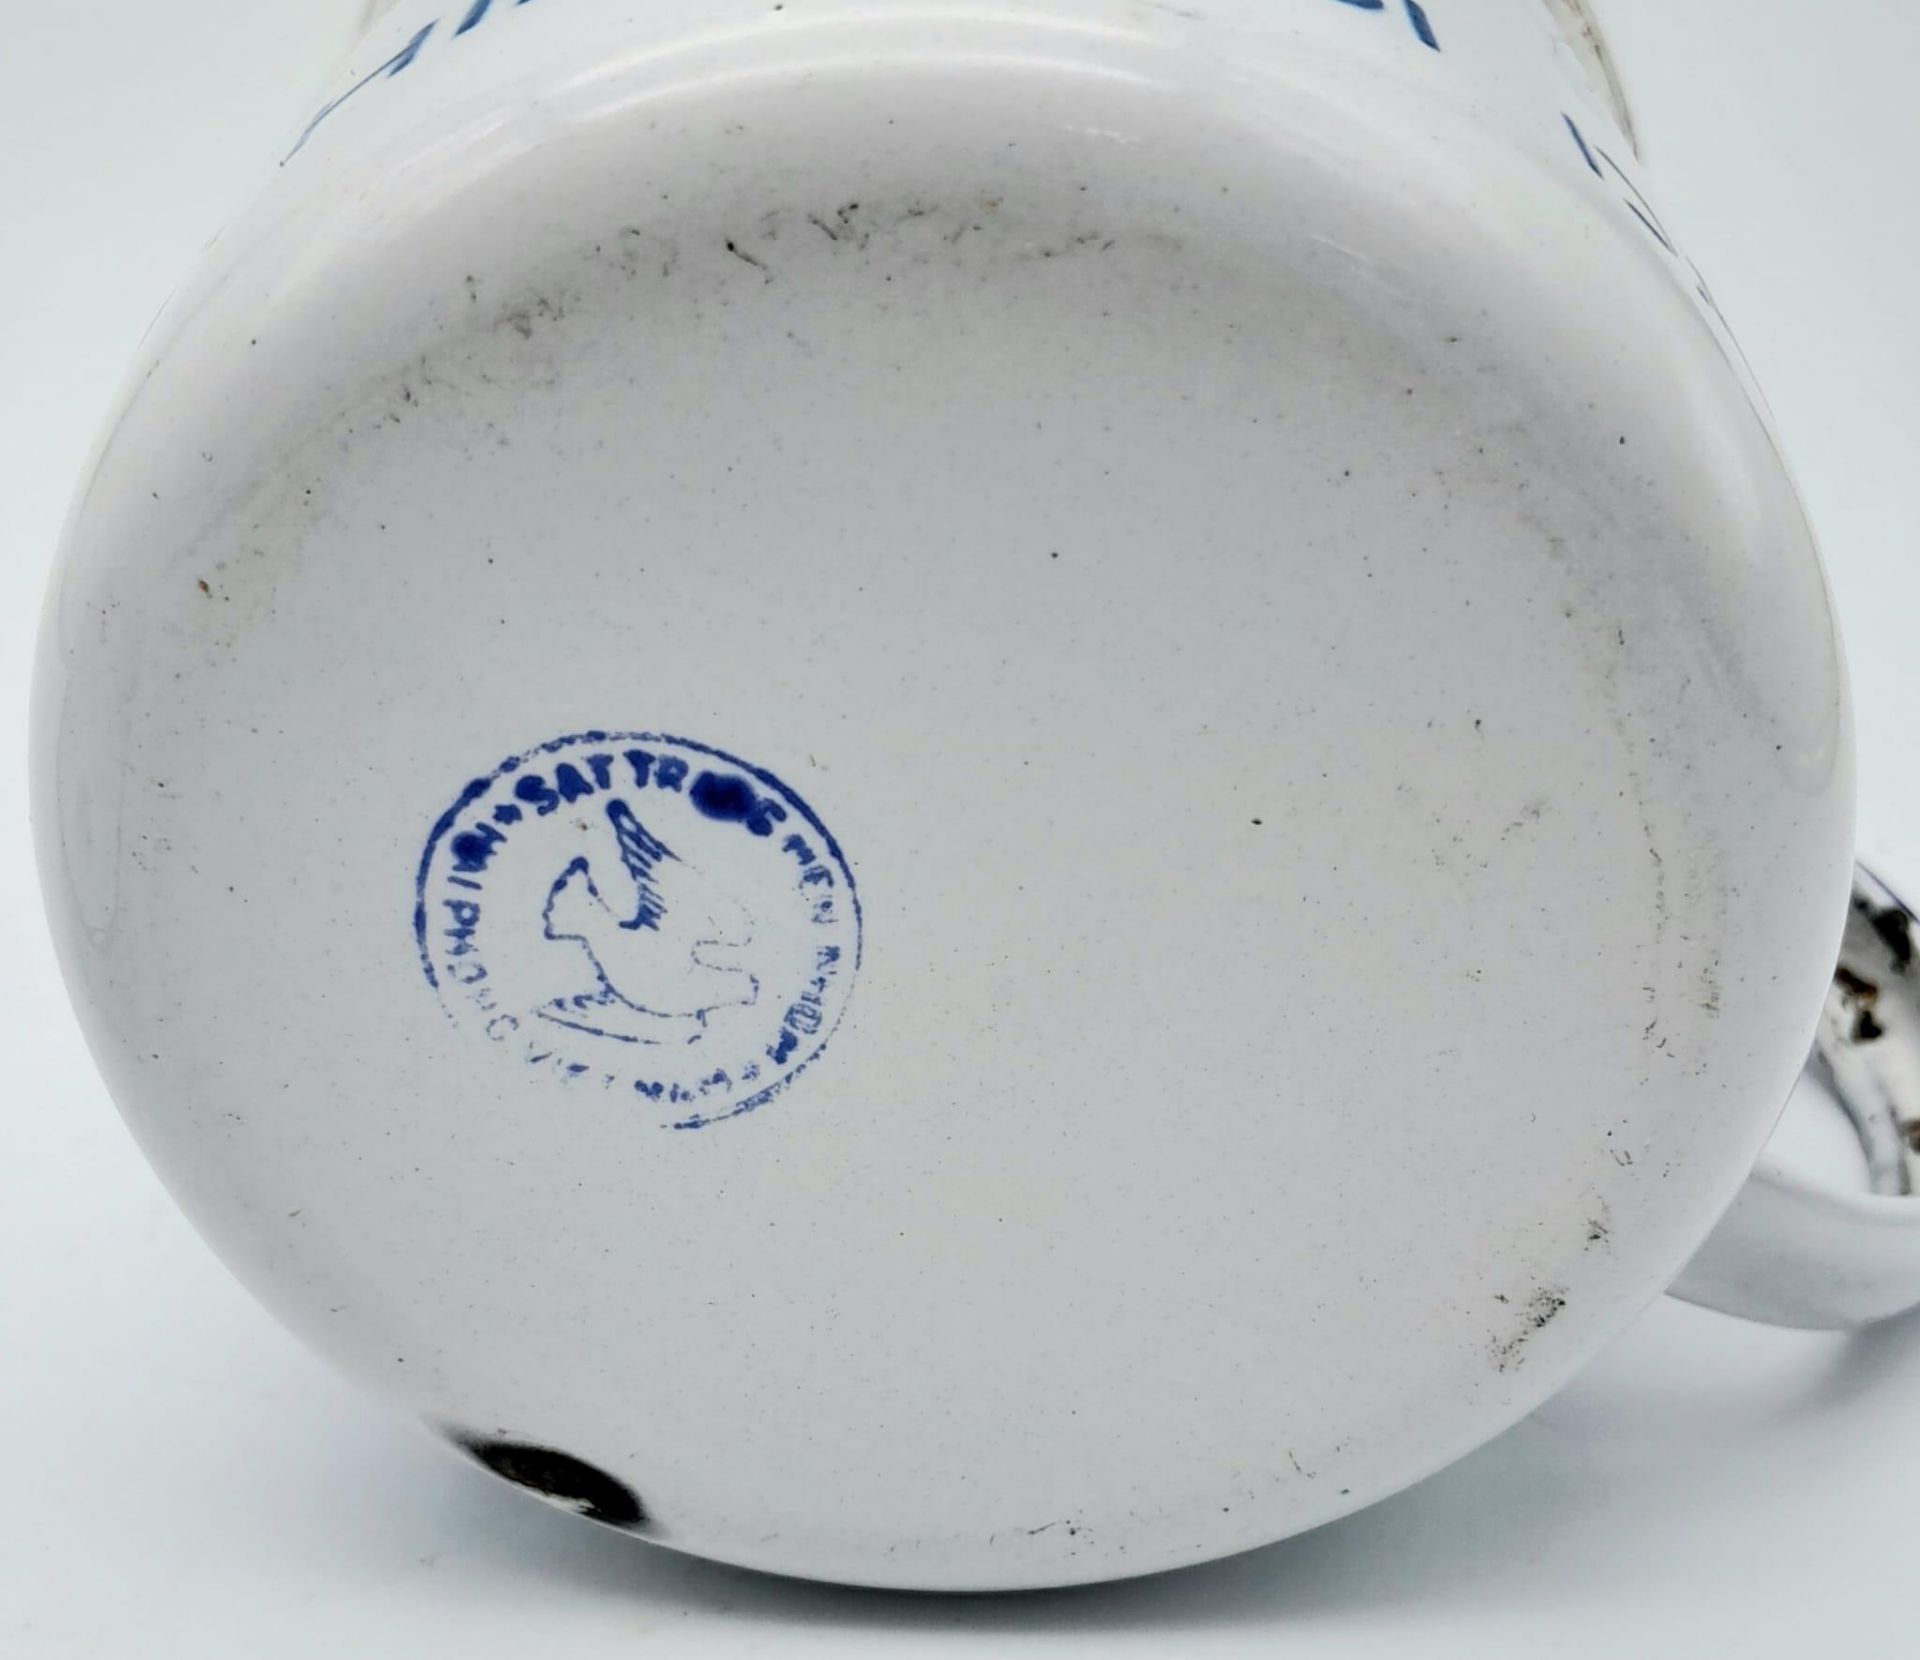 Vietnam War Era North Vietnamese Enamel Rice Cup. “Serving the Country & the People” - Image 5 of 6